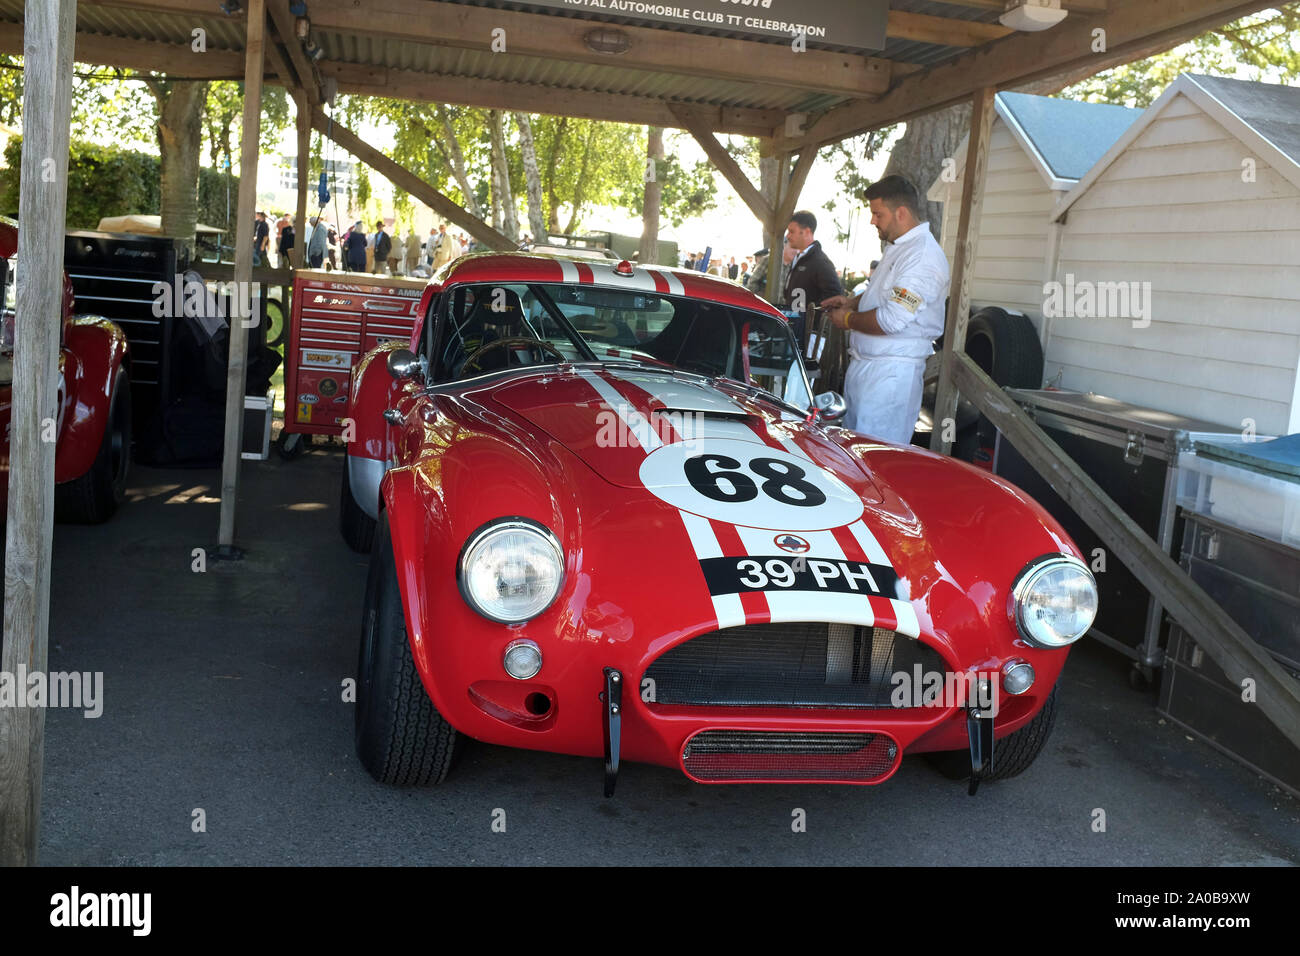 Imminent . Lab September 2019 - Red AC Cobra race cars in the paddock at Goodwood Revival  Stock Photo - Alamy